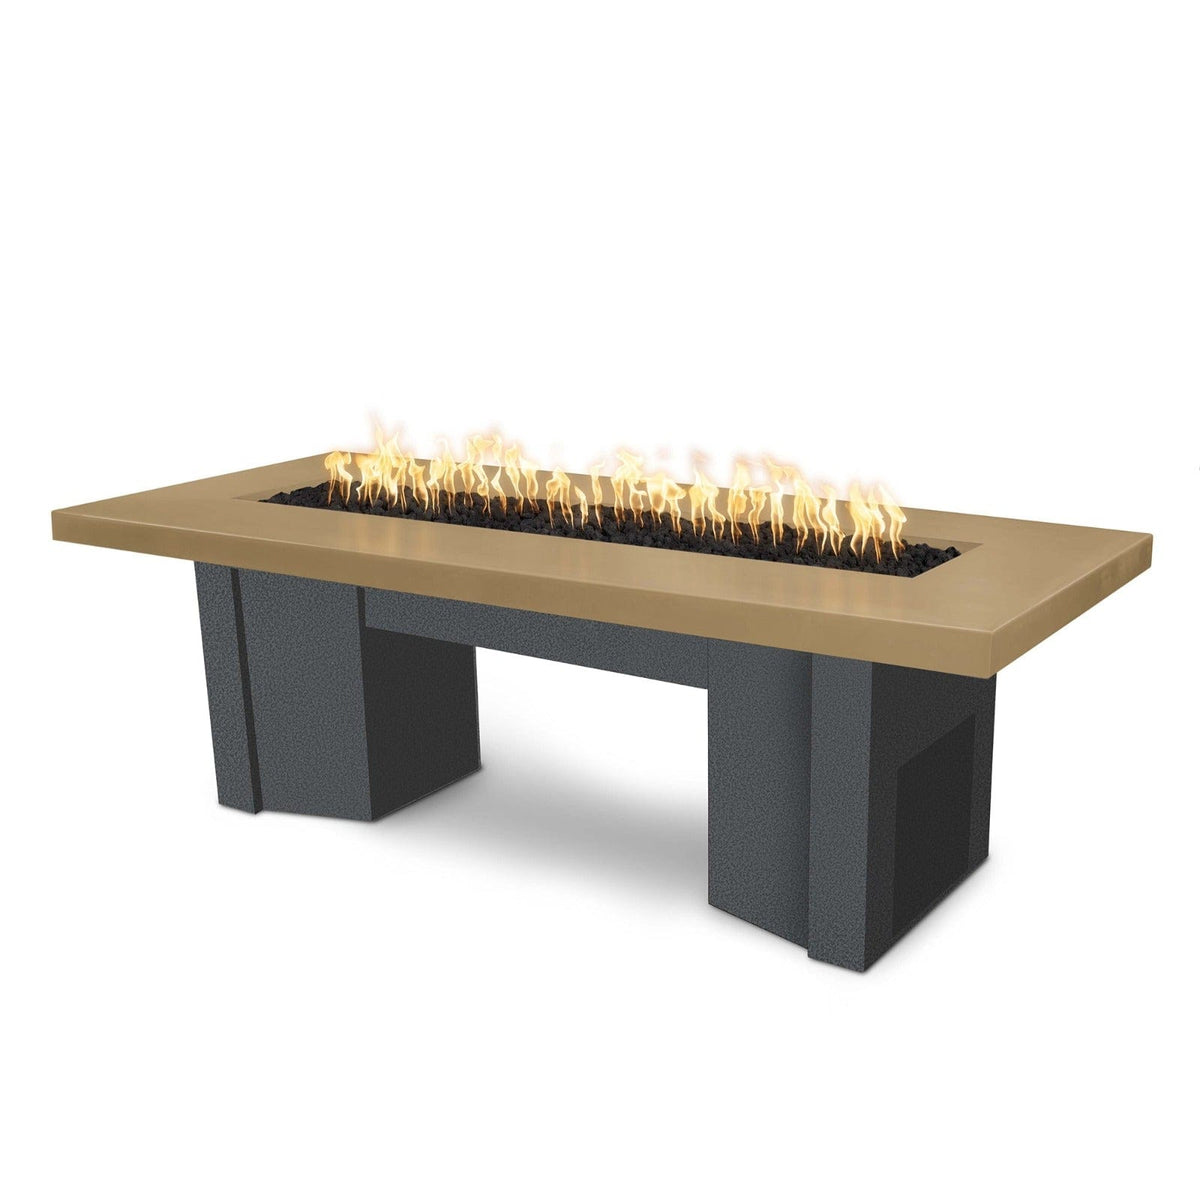 The Outdoor Plus Fire Features Brown (-BRN) / Silver Vein Powder Coated Steel (-SLV) The Outdoor Plus 78&quot; Alameda Fire Table Smooth Concrete in Natural Gas - Match Lit with Flame Sense System / OPT-ALMGFRC78FSML-NG